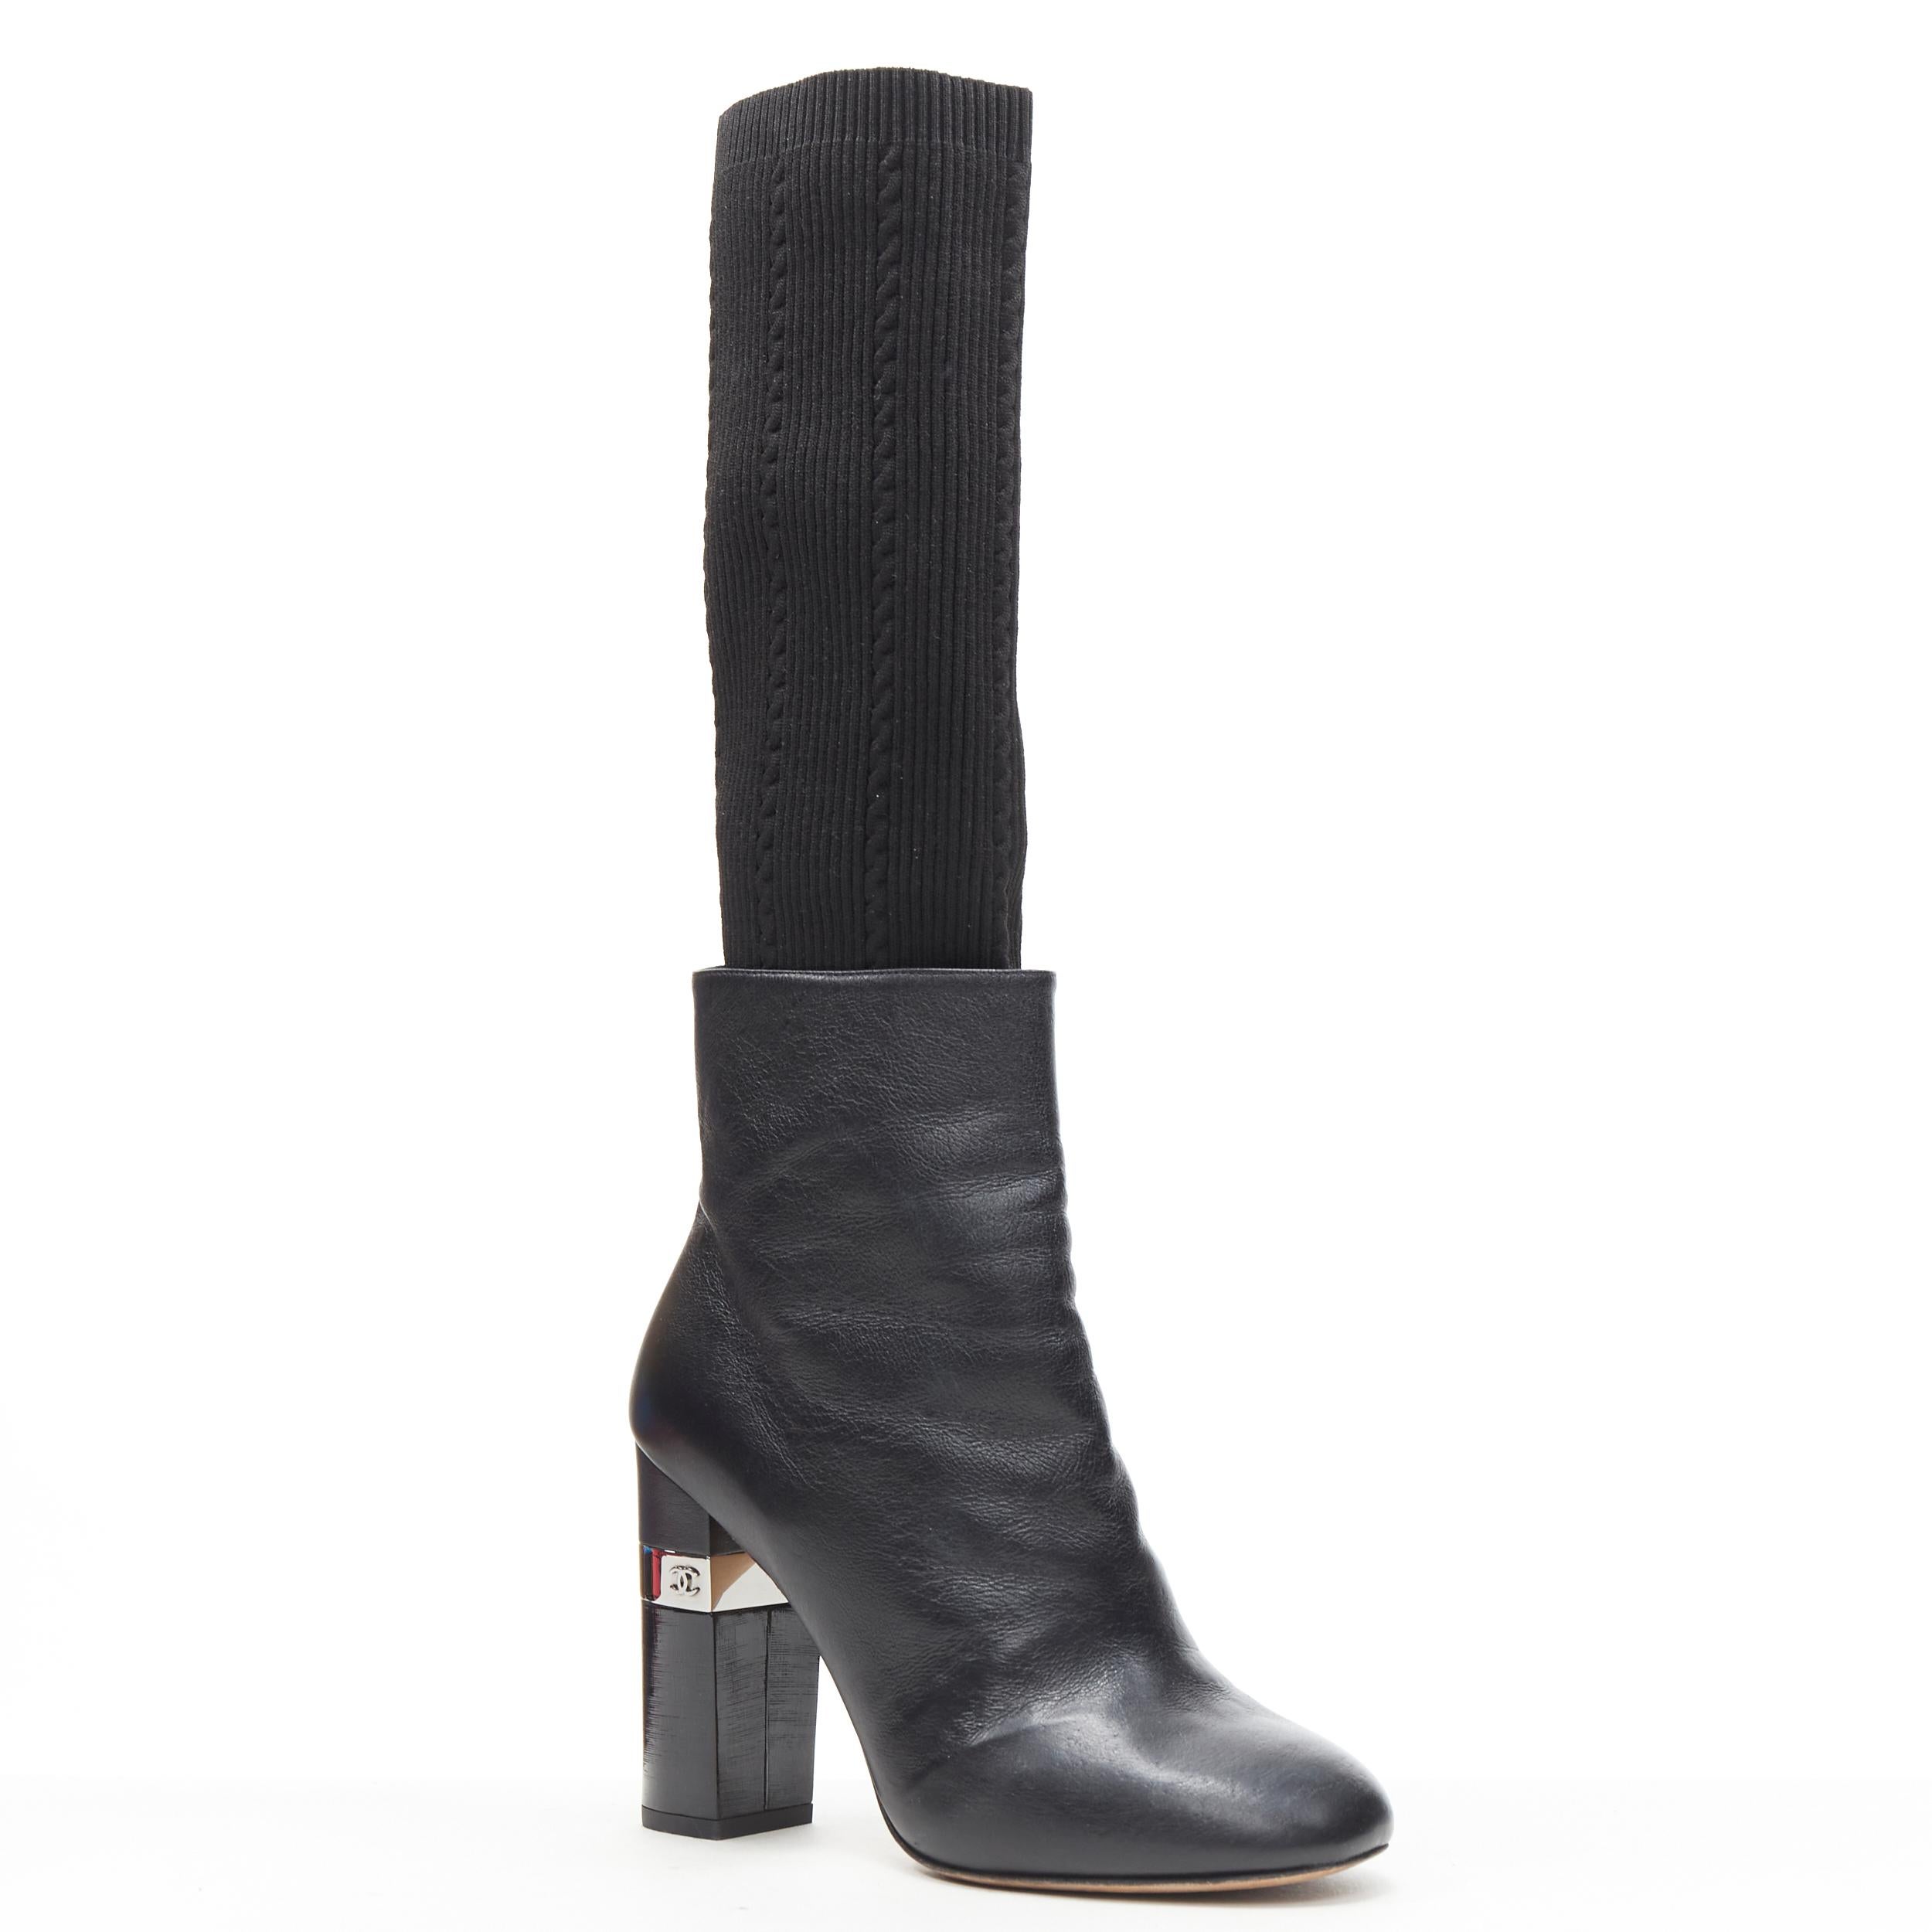 CHANEL black leather round toe CC metal chunky heel ribbed sock bootie EU37.5 
Reference: GIYG/A00114 
Brand: Chanel 
Designer: Karl Lagerfeld 
Material: Leather 
Color: Black 
Pattern: Solid 
Closure: Zip 
Extra Detail: Attached ribbed sock knit.